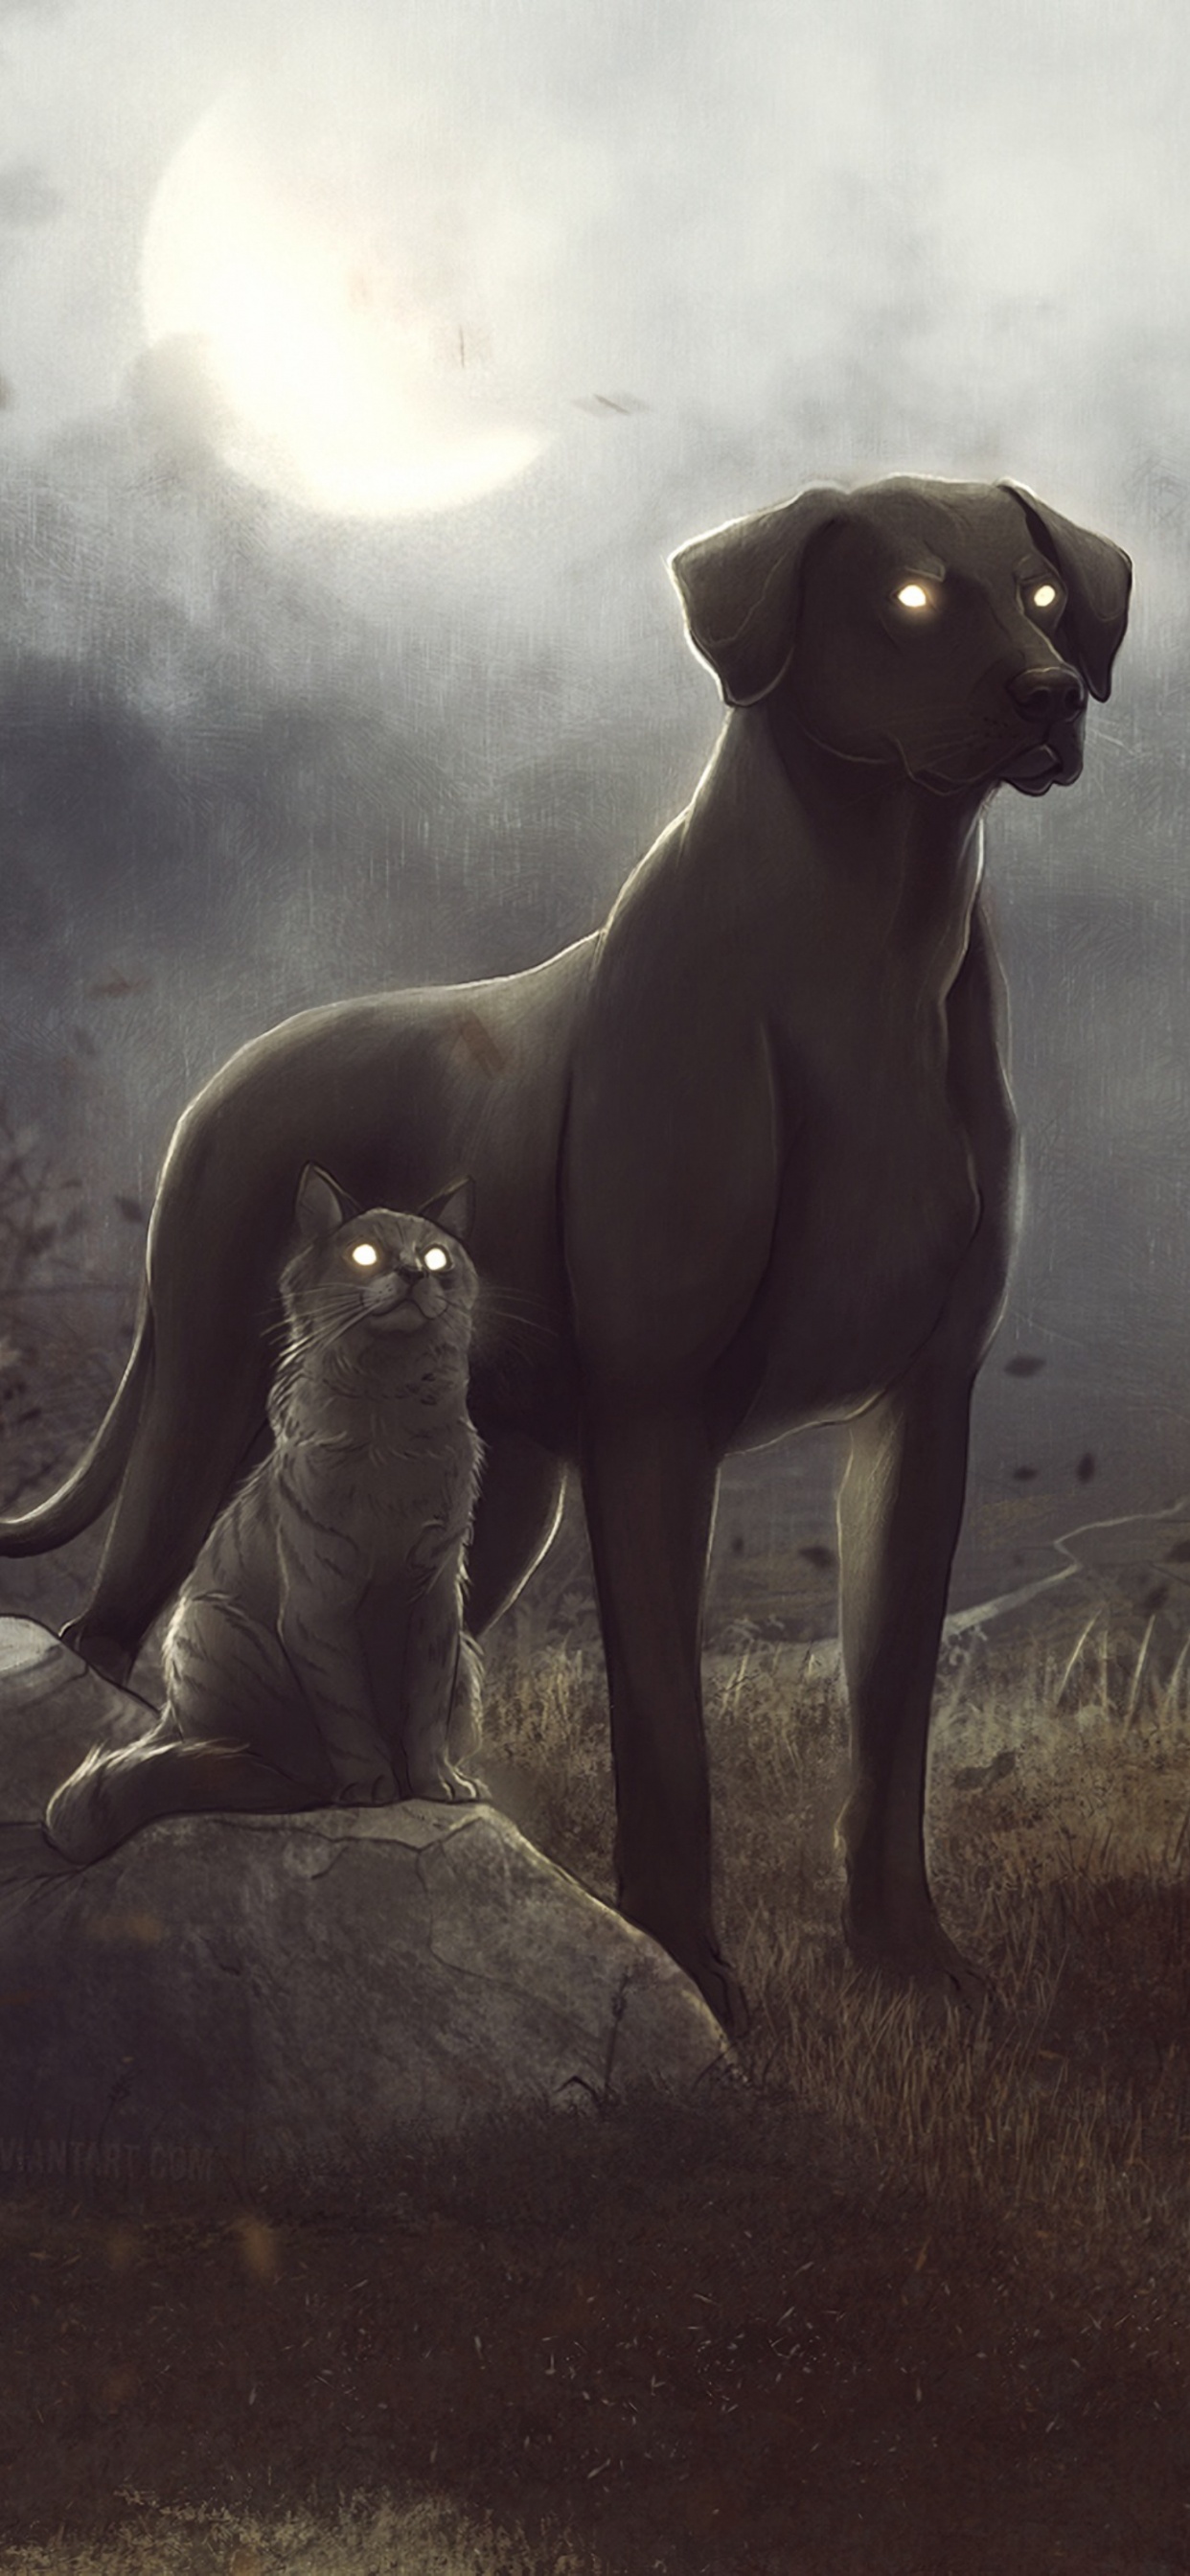 2 Gray Dogs on Brown Grass Field. Wallpaper in 1242x2688 Resolution